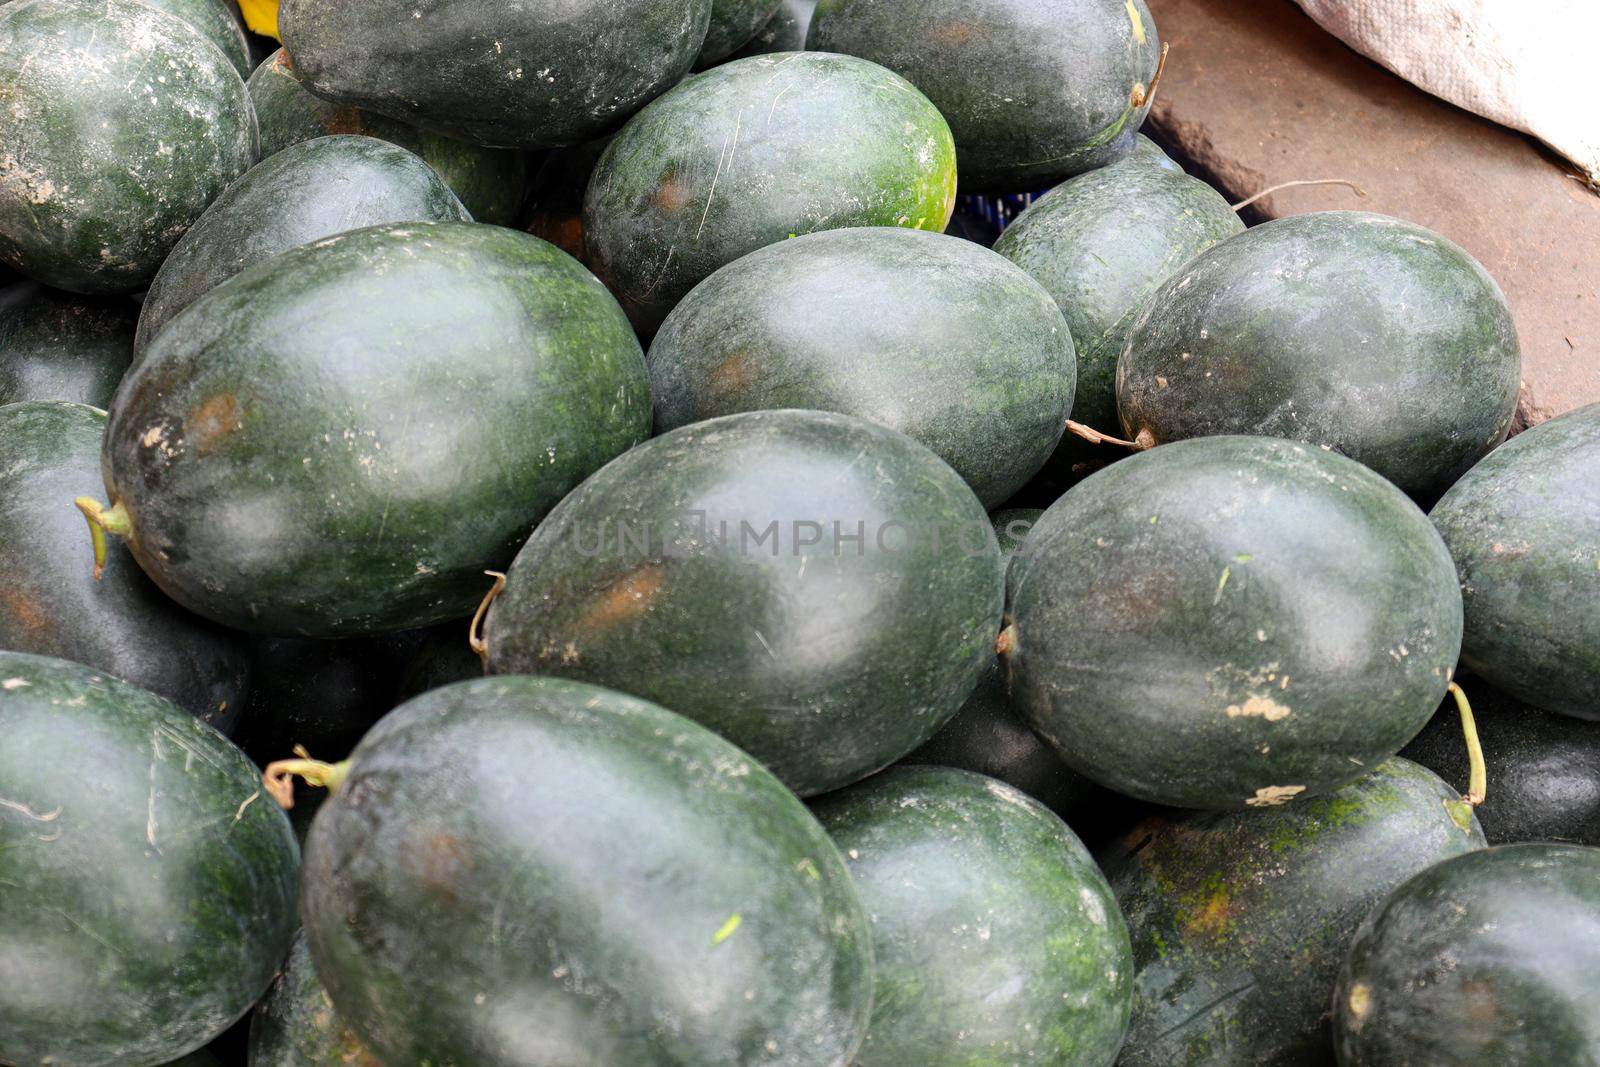 watermelon stock on shop for sell by jahidul2358